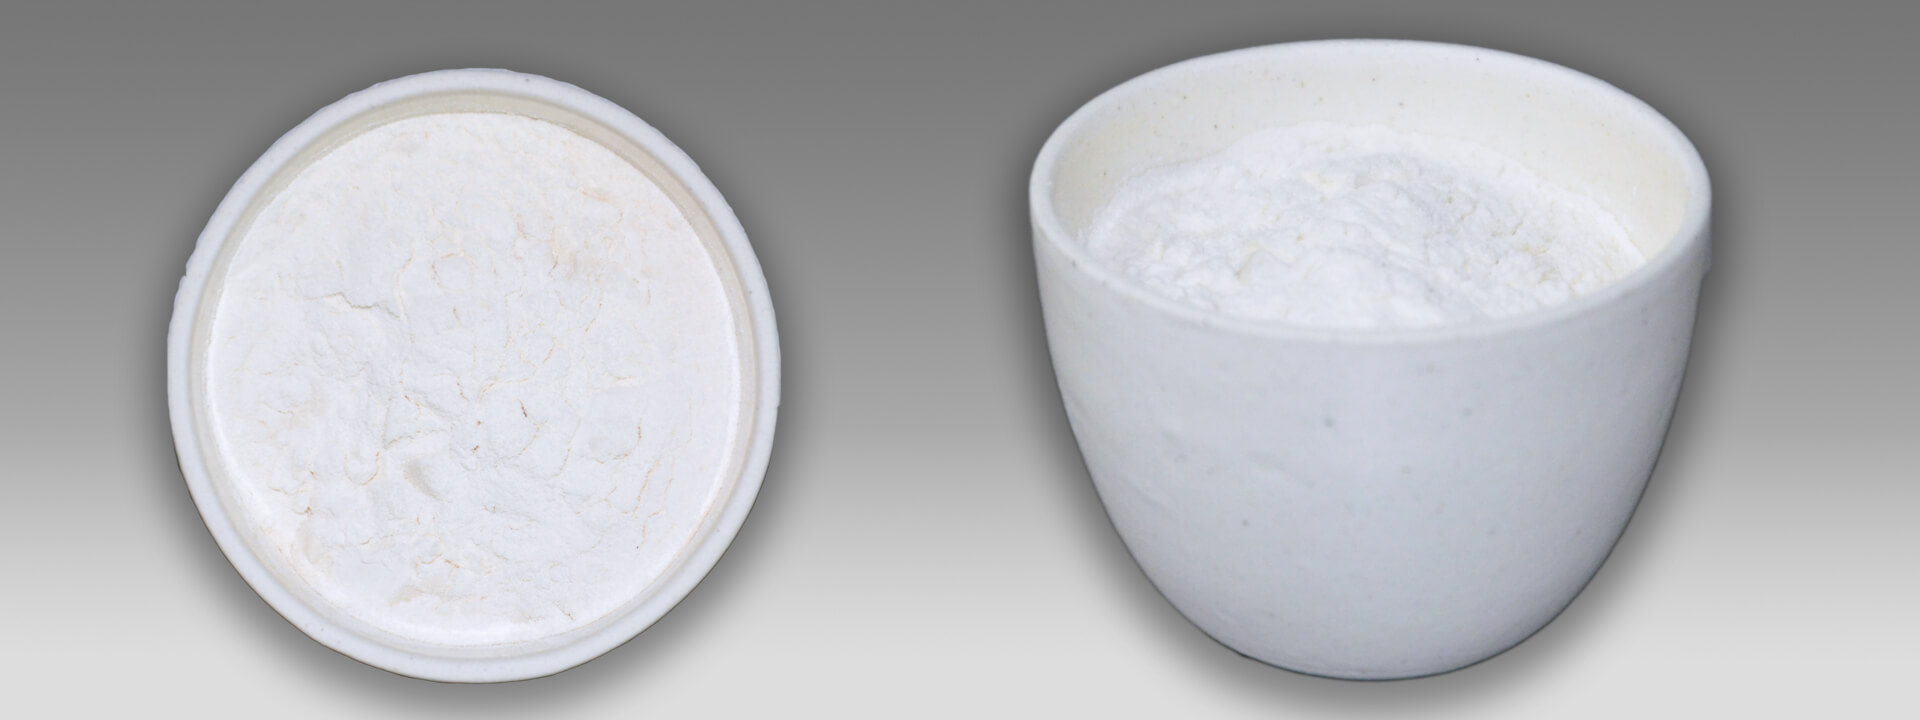 Oxidized starch from VIMAL E-1404